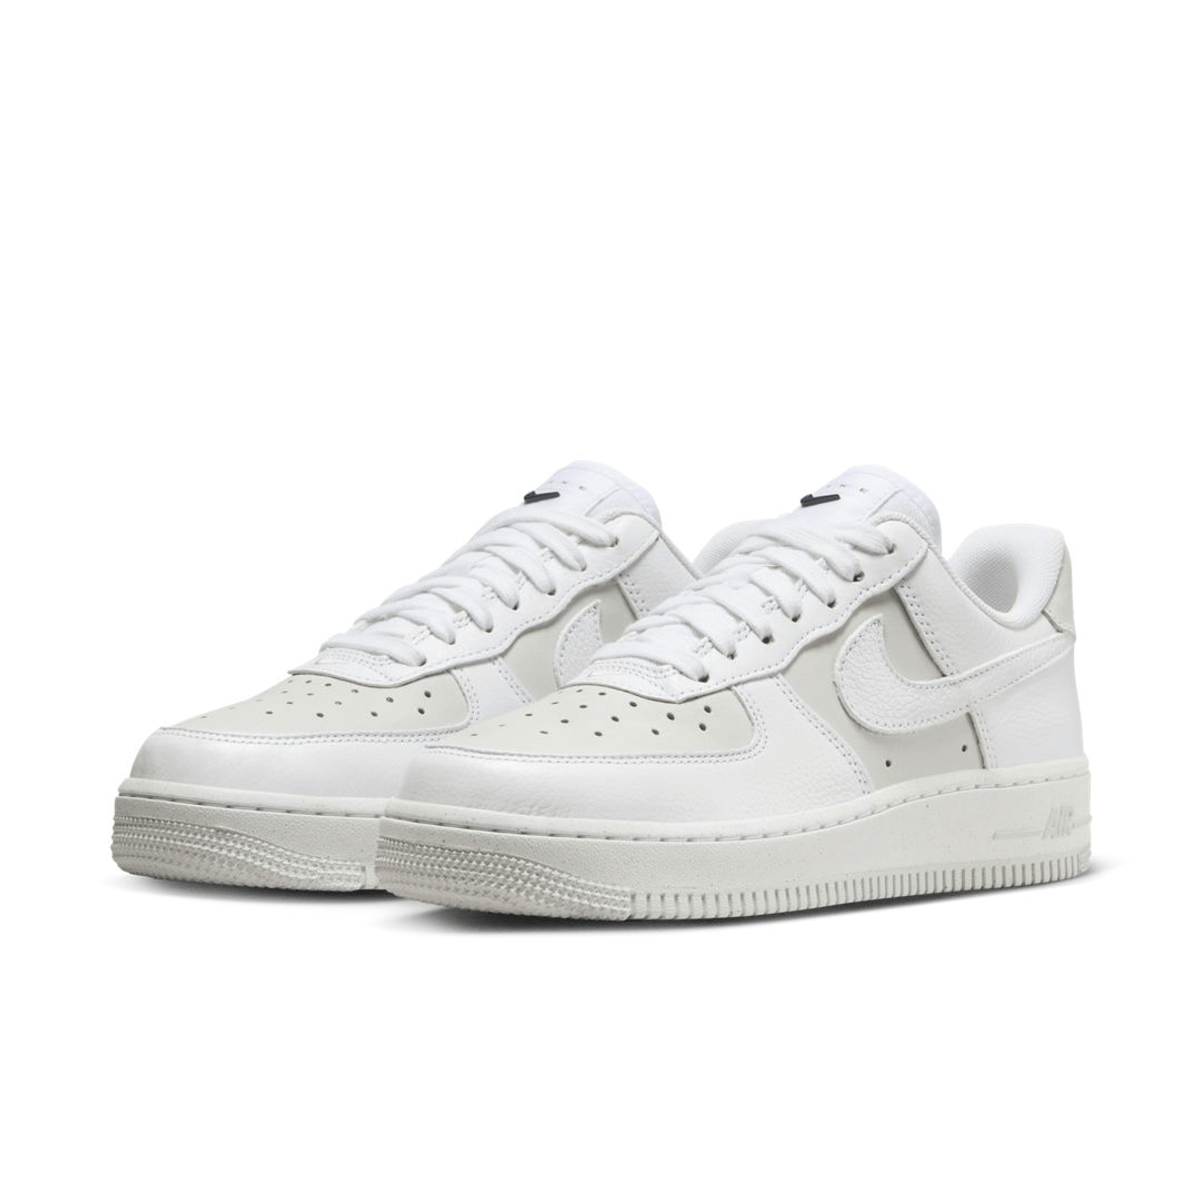 Nike Air Force 1 “Light Smoke Grey” Brings Some Subtle Updates To The Classic